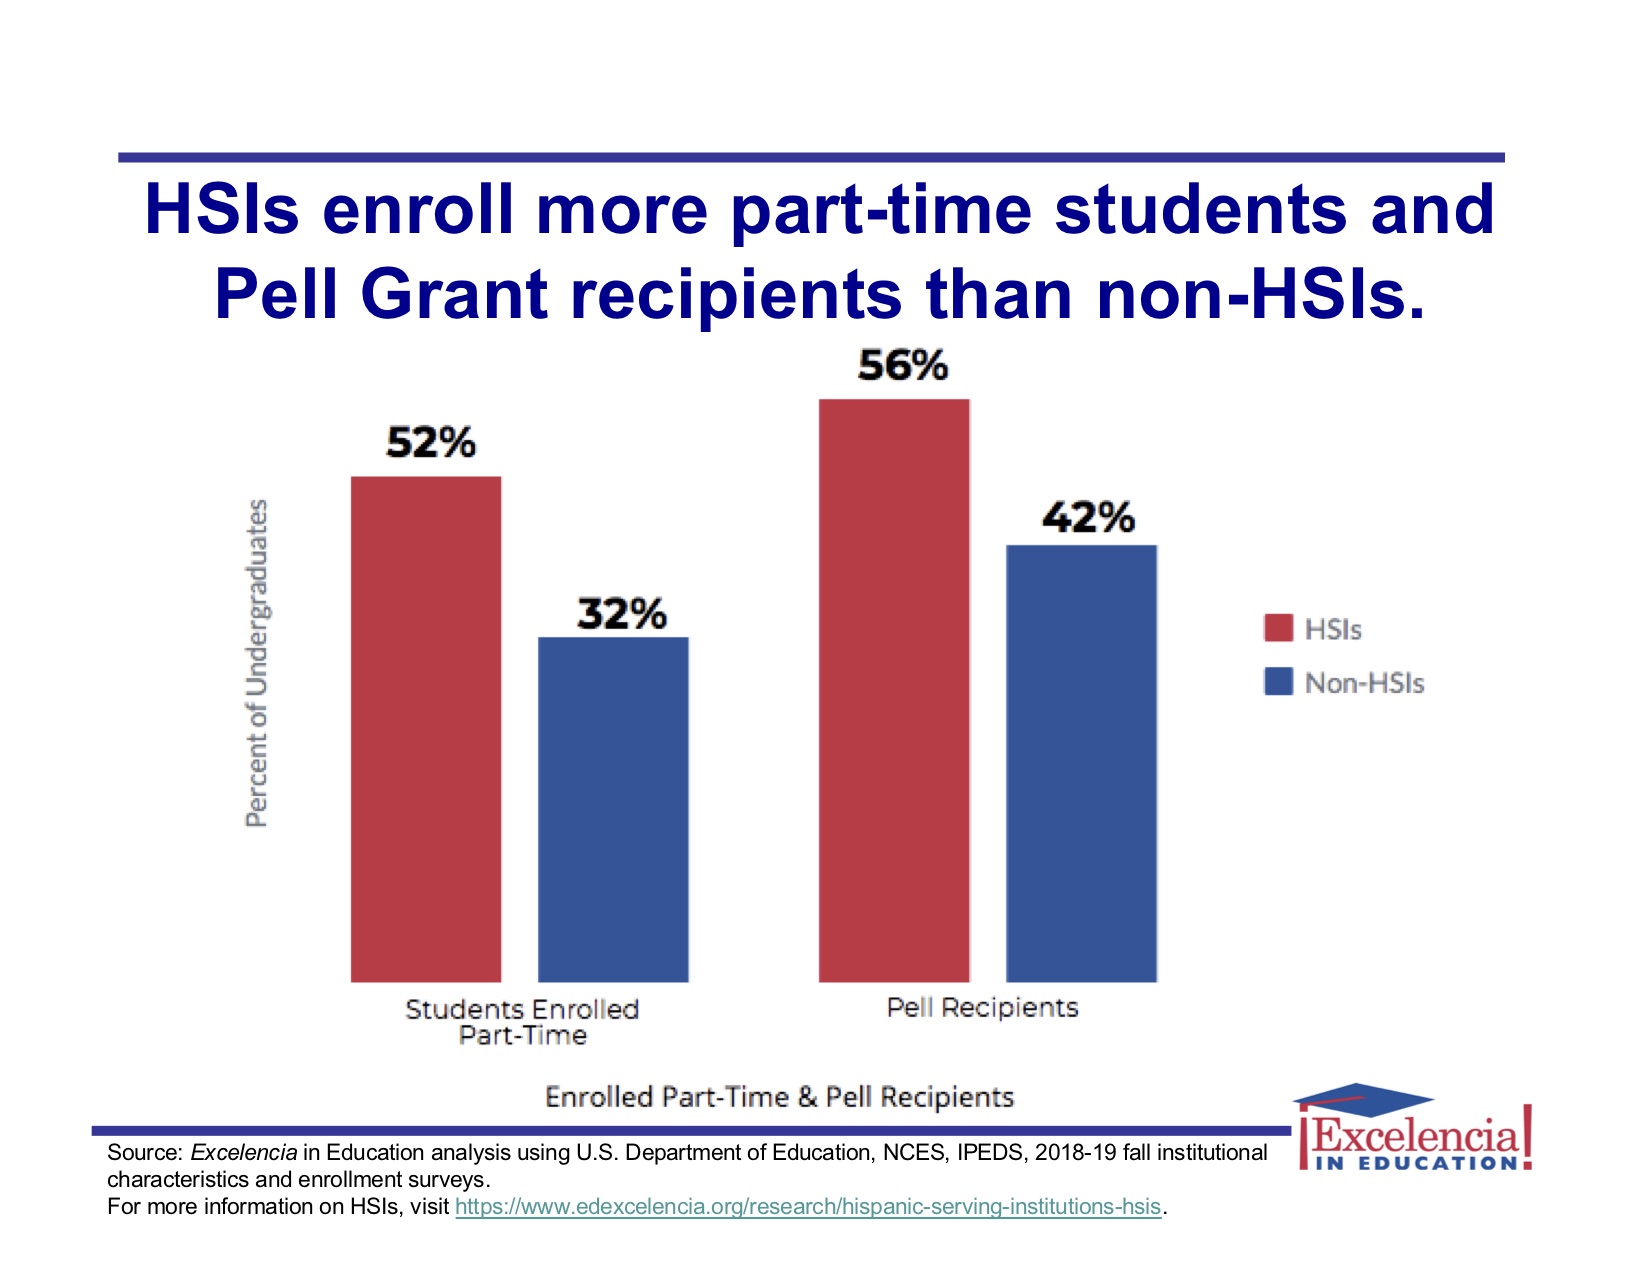 Graphic 3 - Hispanic-Serving Institutions (HSI) enrollment of part-time students and Pell Grant recipients (JPG)